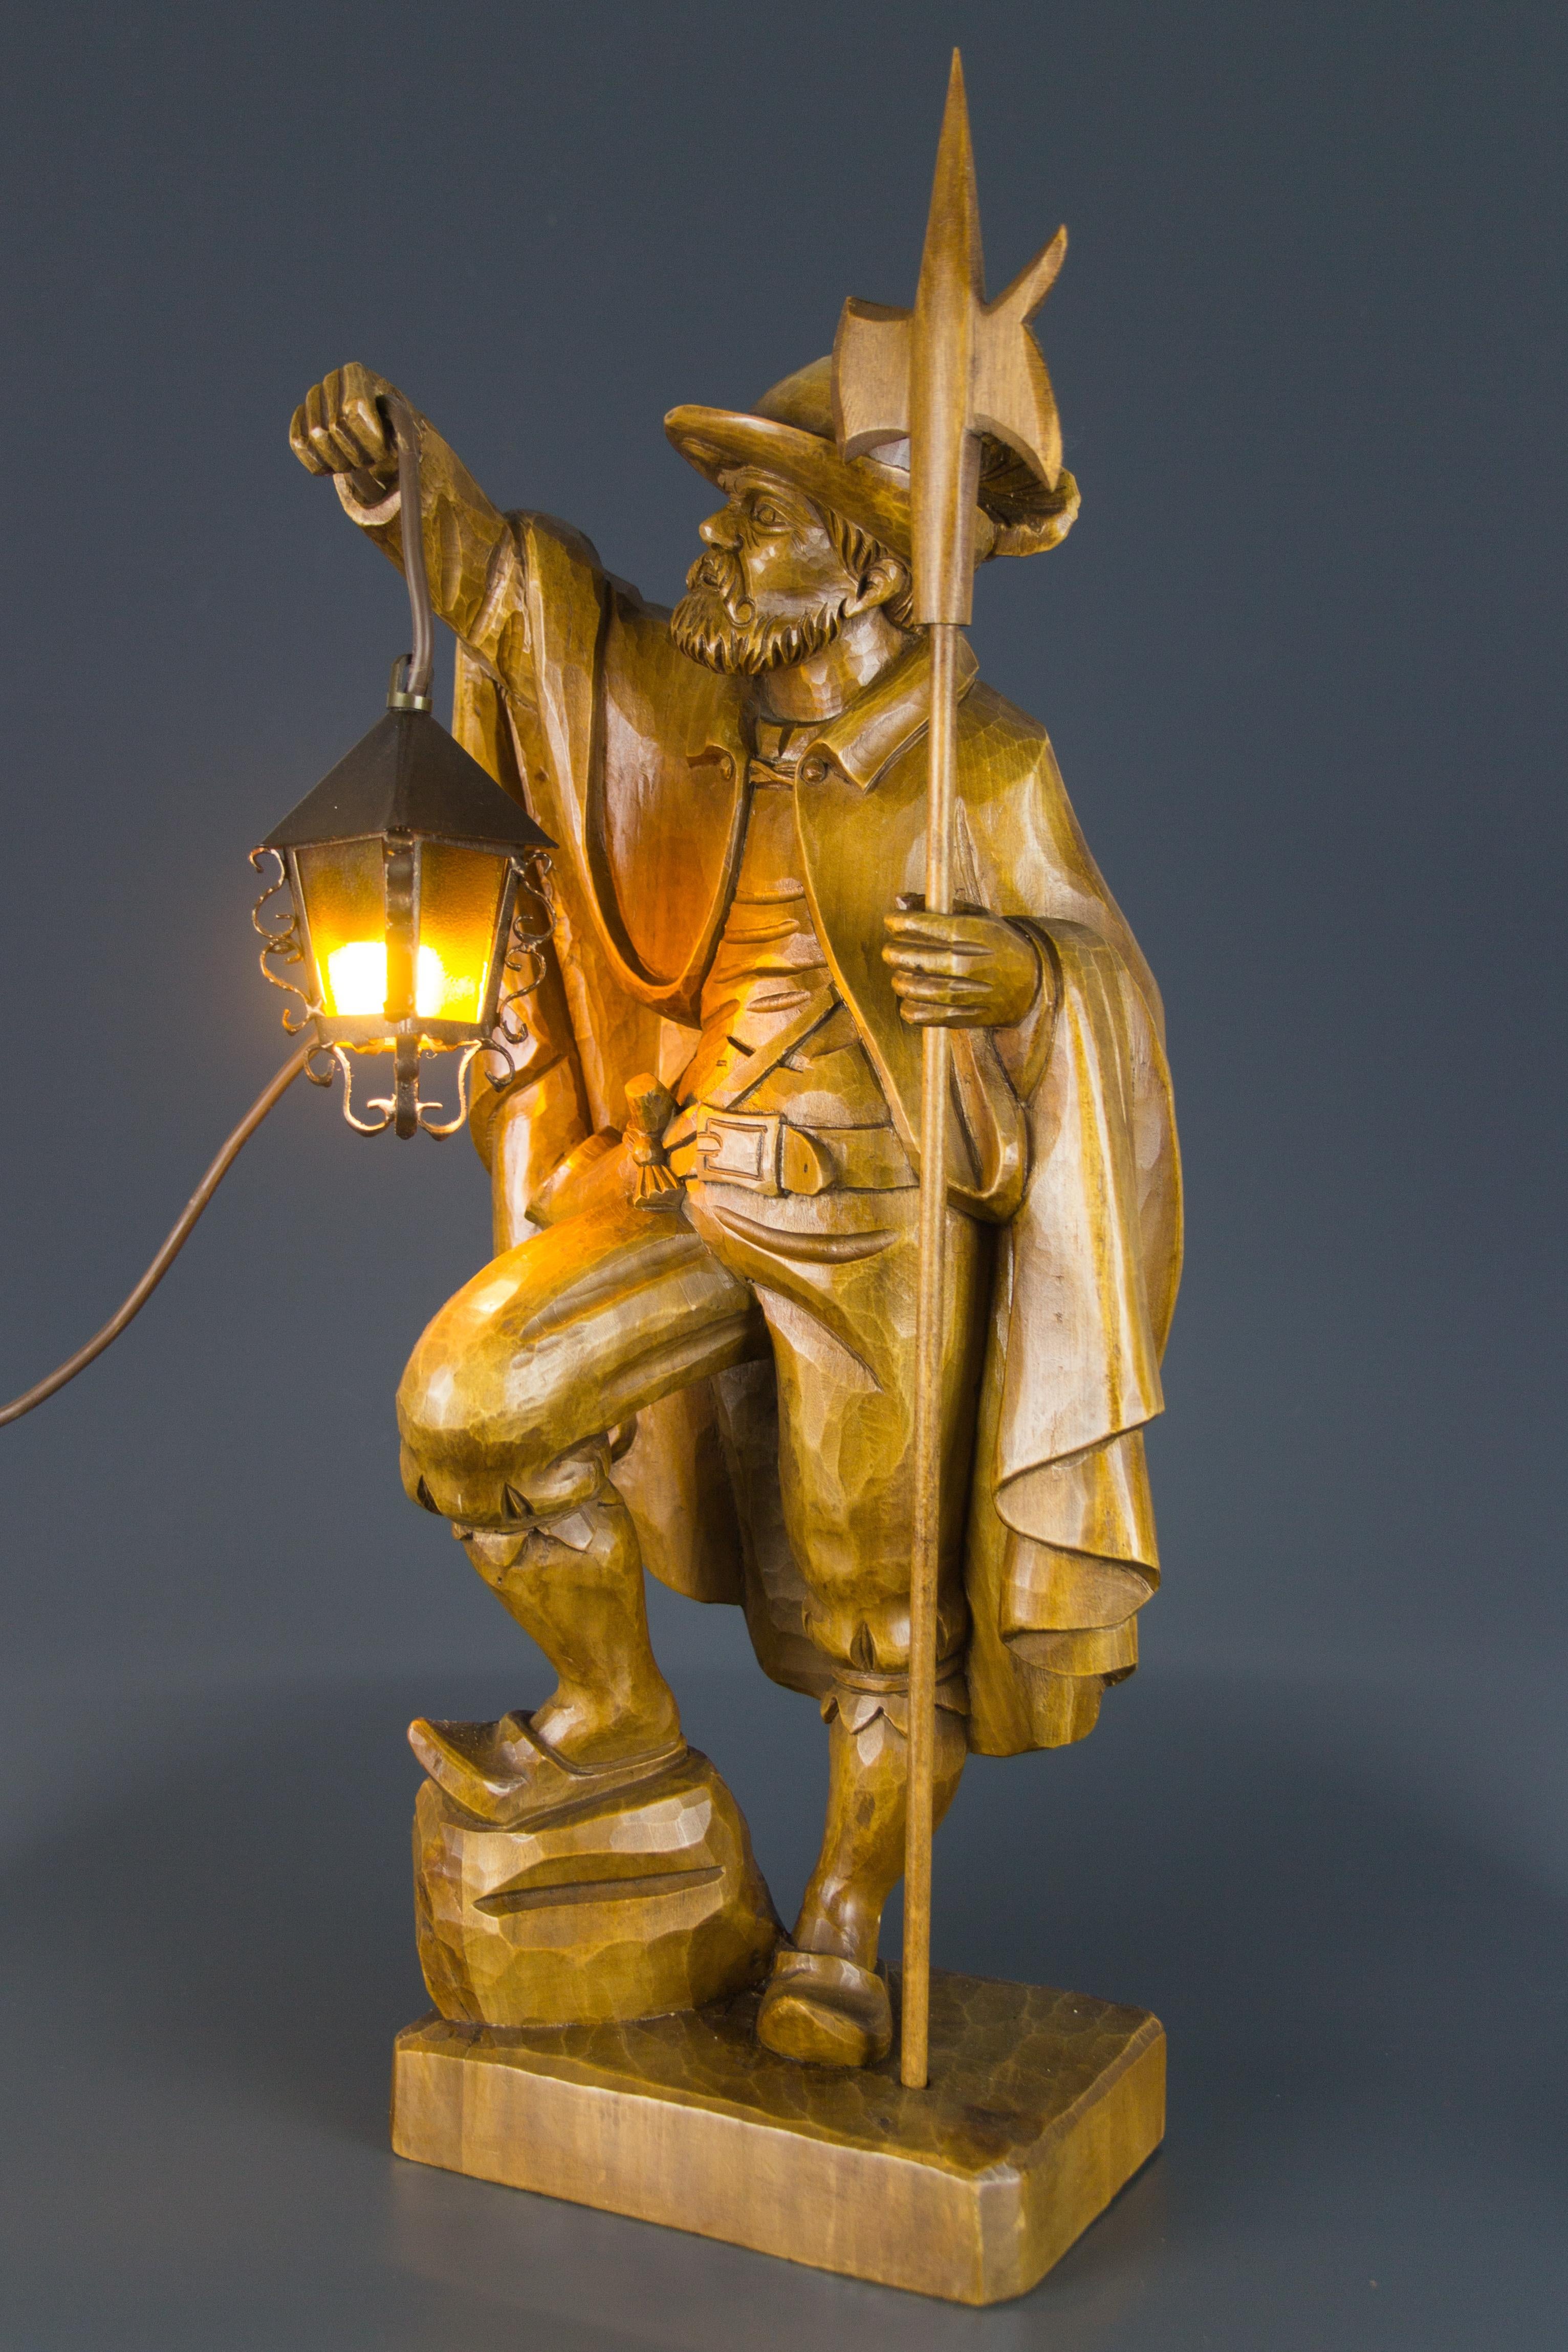 A masterfully hand carved wooden lamp features a large sculpture of a night watchman with a lantern and halberd. Lantern is made of glass and iron. This beautiful sculpture lamp can be used as a floor or a table lamp. Germany, mid-20th century.
One